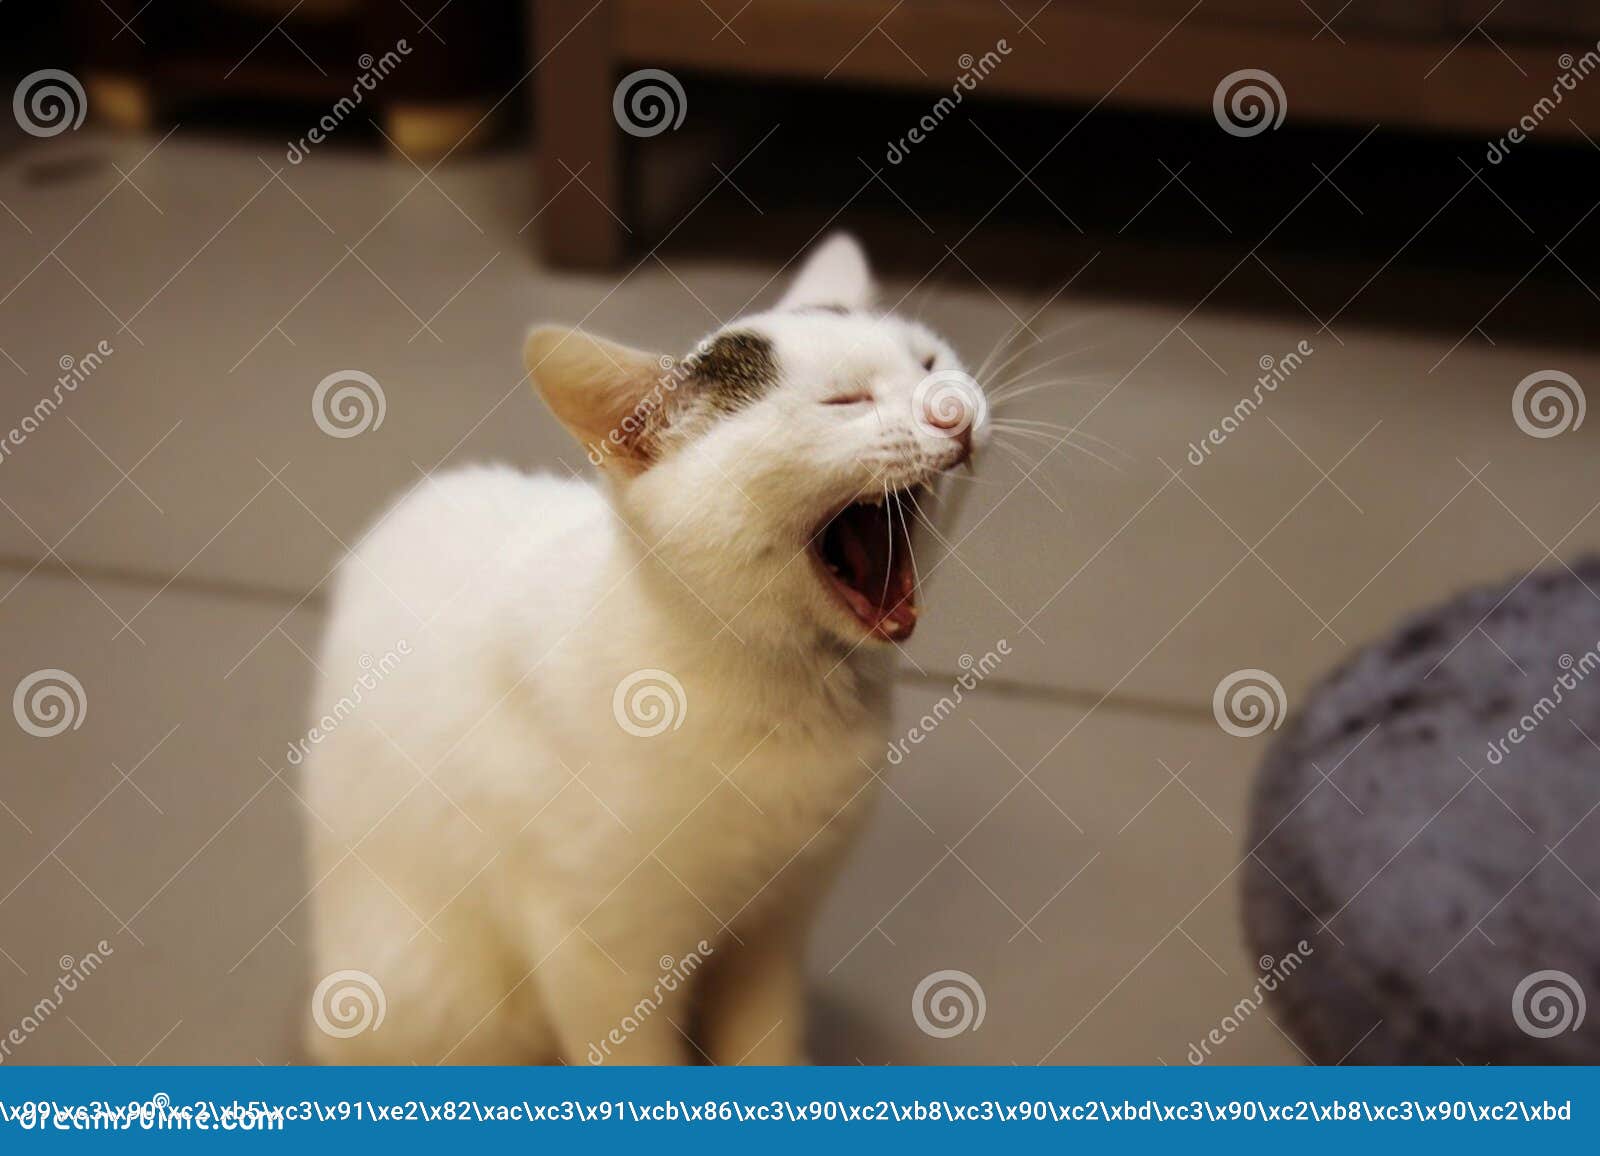 Very Funny Cat Laughing of the Close Up. Stock Image - Image of ...